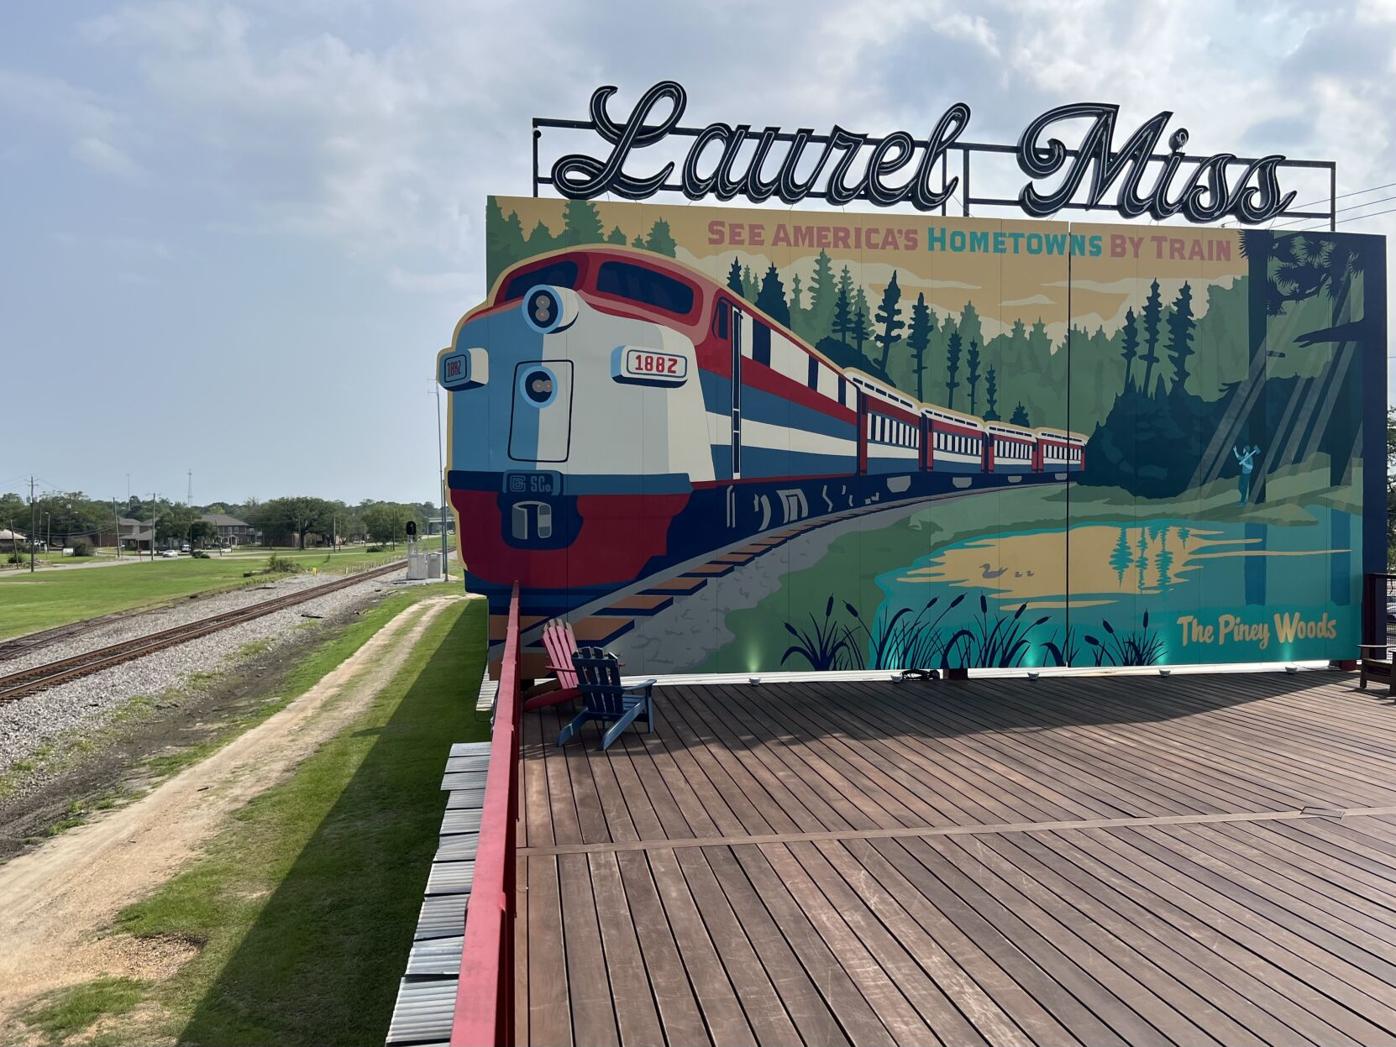 Laurel, Miss. pulls in tourists thanks to HGTV's 'Hometown